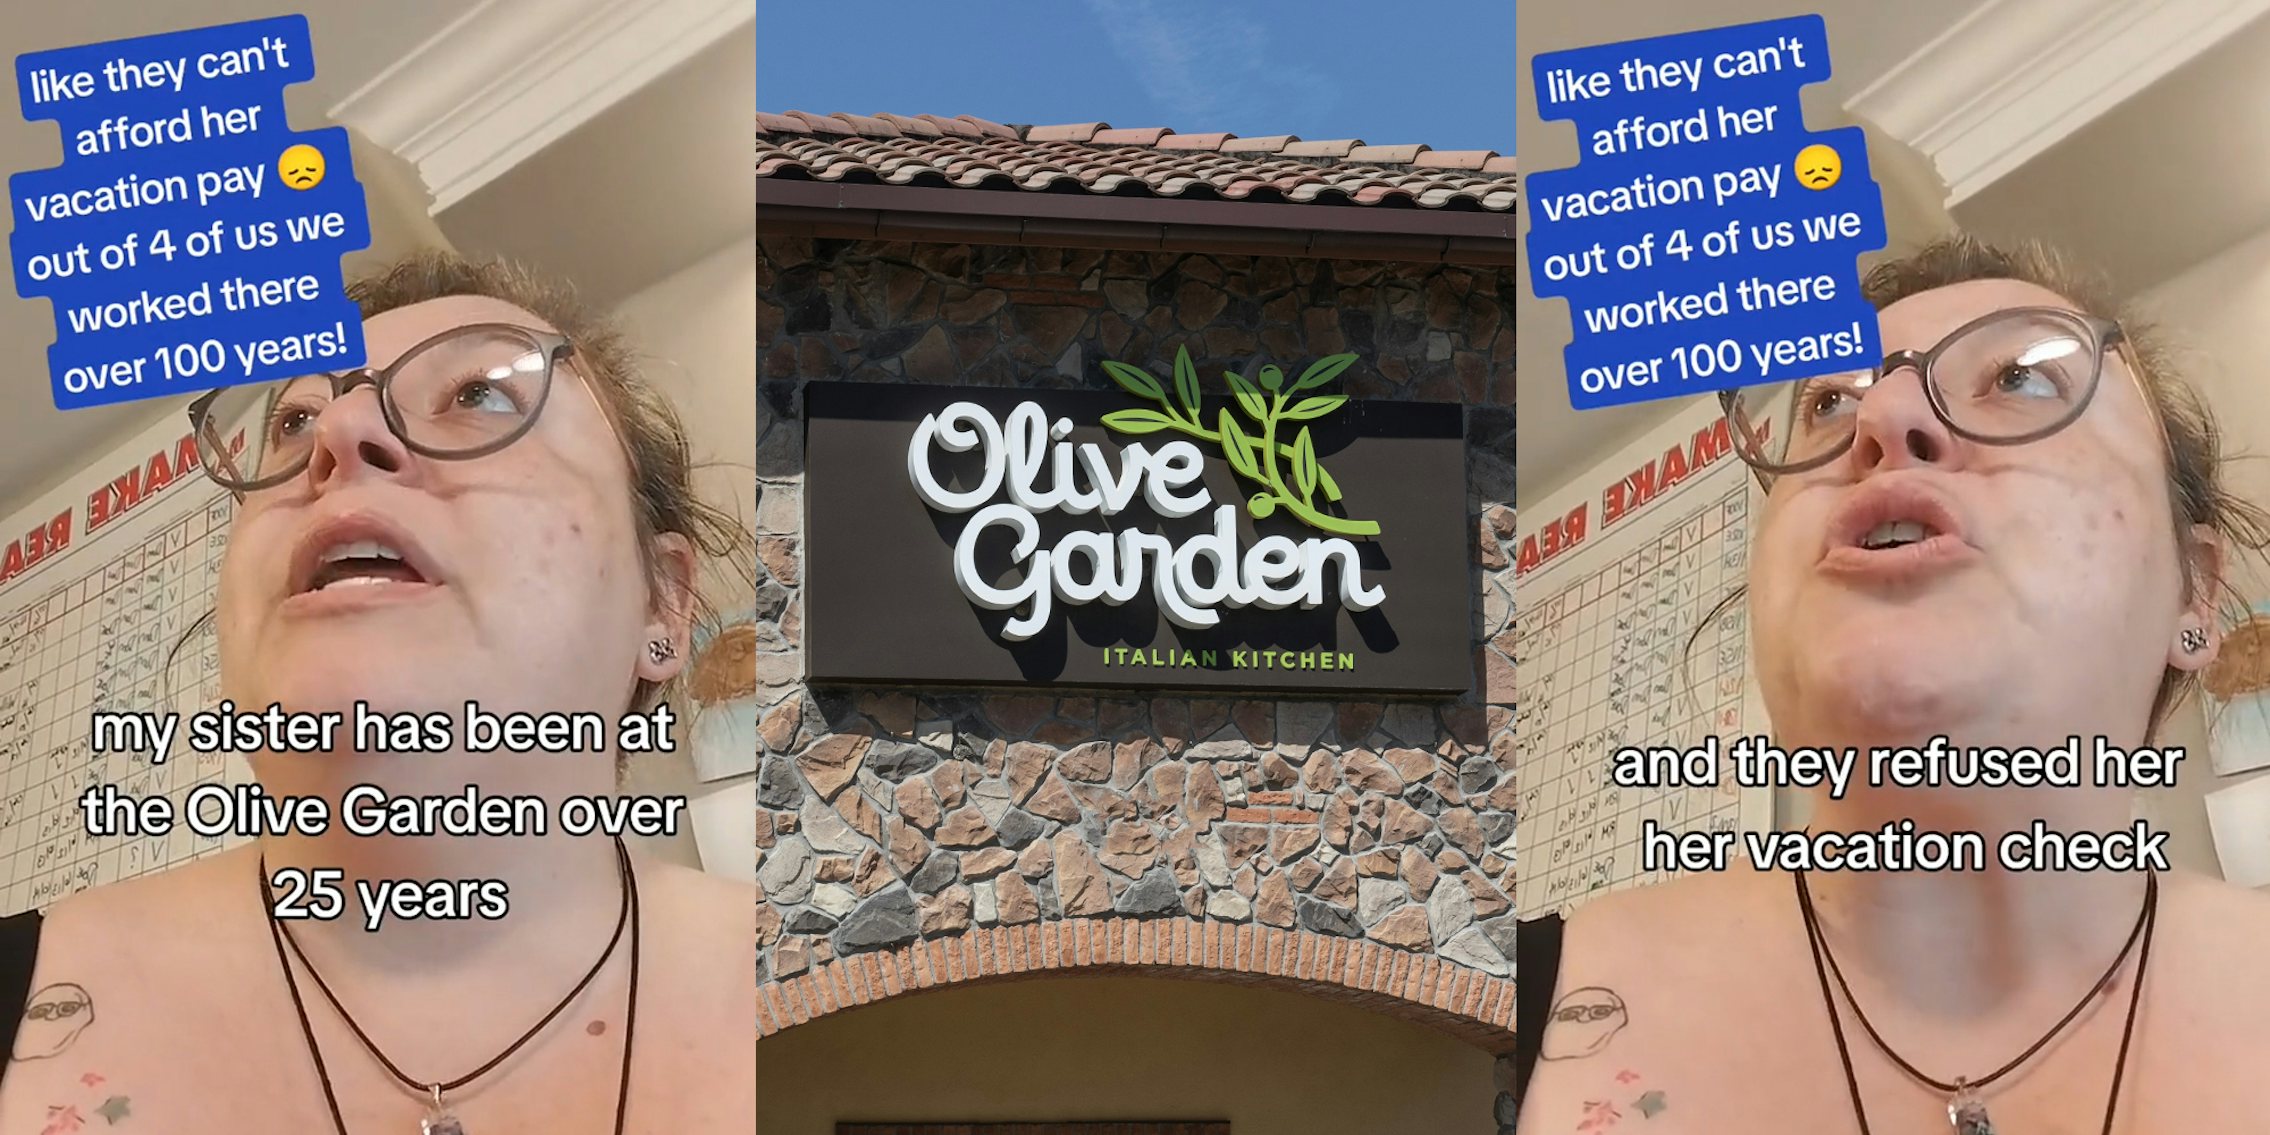 Olive Garden worker speaking with caption 'like they can't afford her vacation pay out of 4 of us we worked there over 100 years! my sister has been at the Olive Garden over 25 years' (l) Olive Garden sign on building (c) Olive Garden worker speaking with caption 'like they can't afford her vacation pay out of 4 of us we worked there over 100 years! and they refused her vacation check' (r)